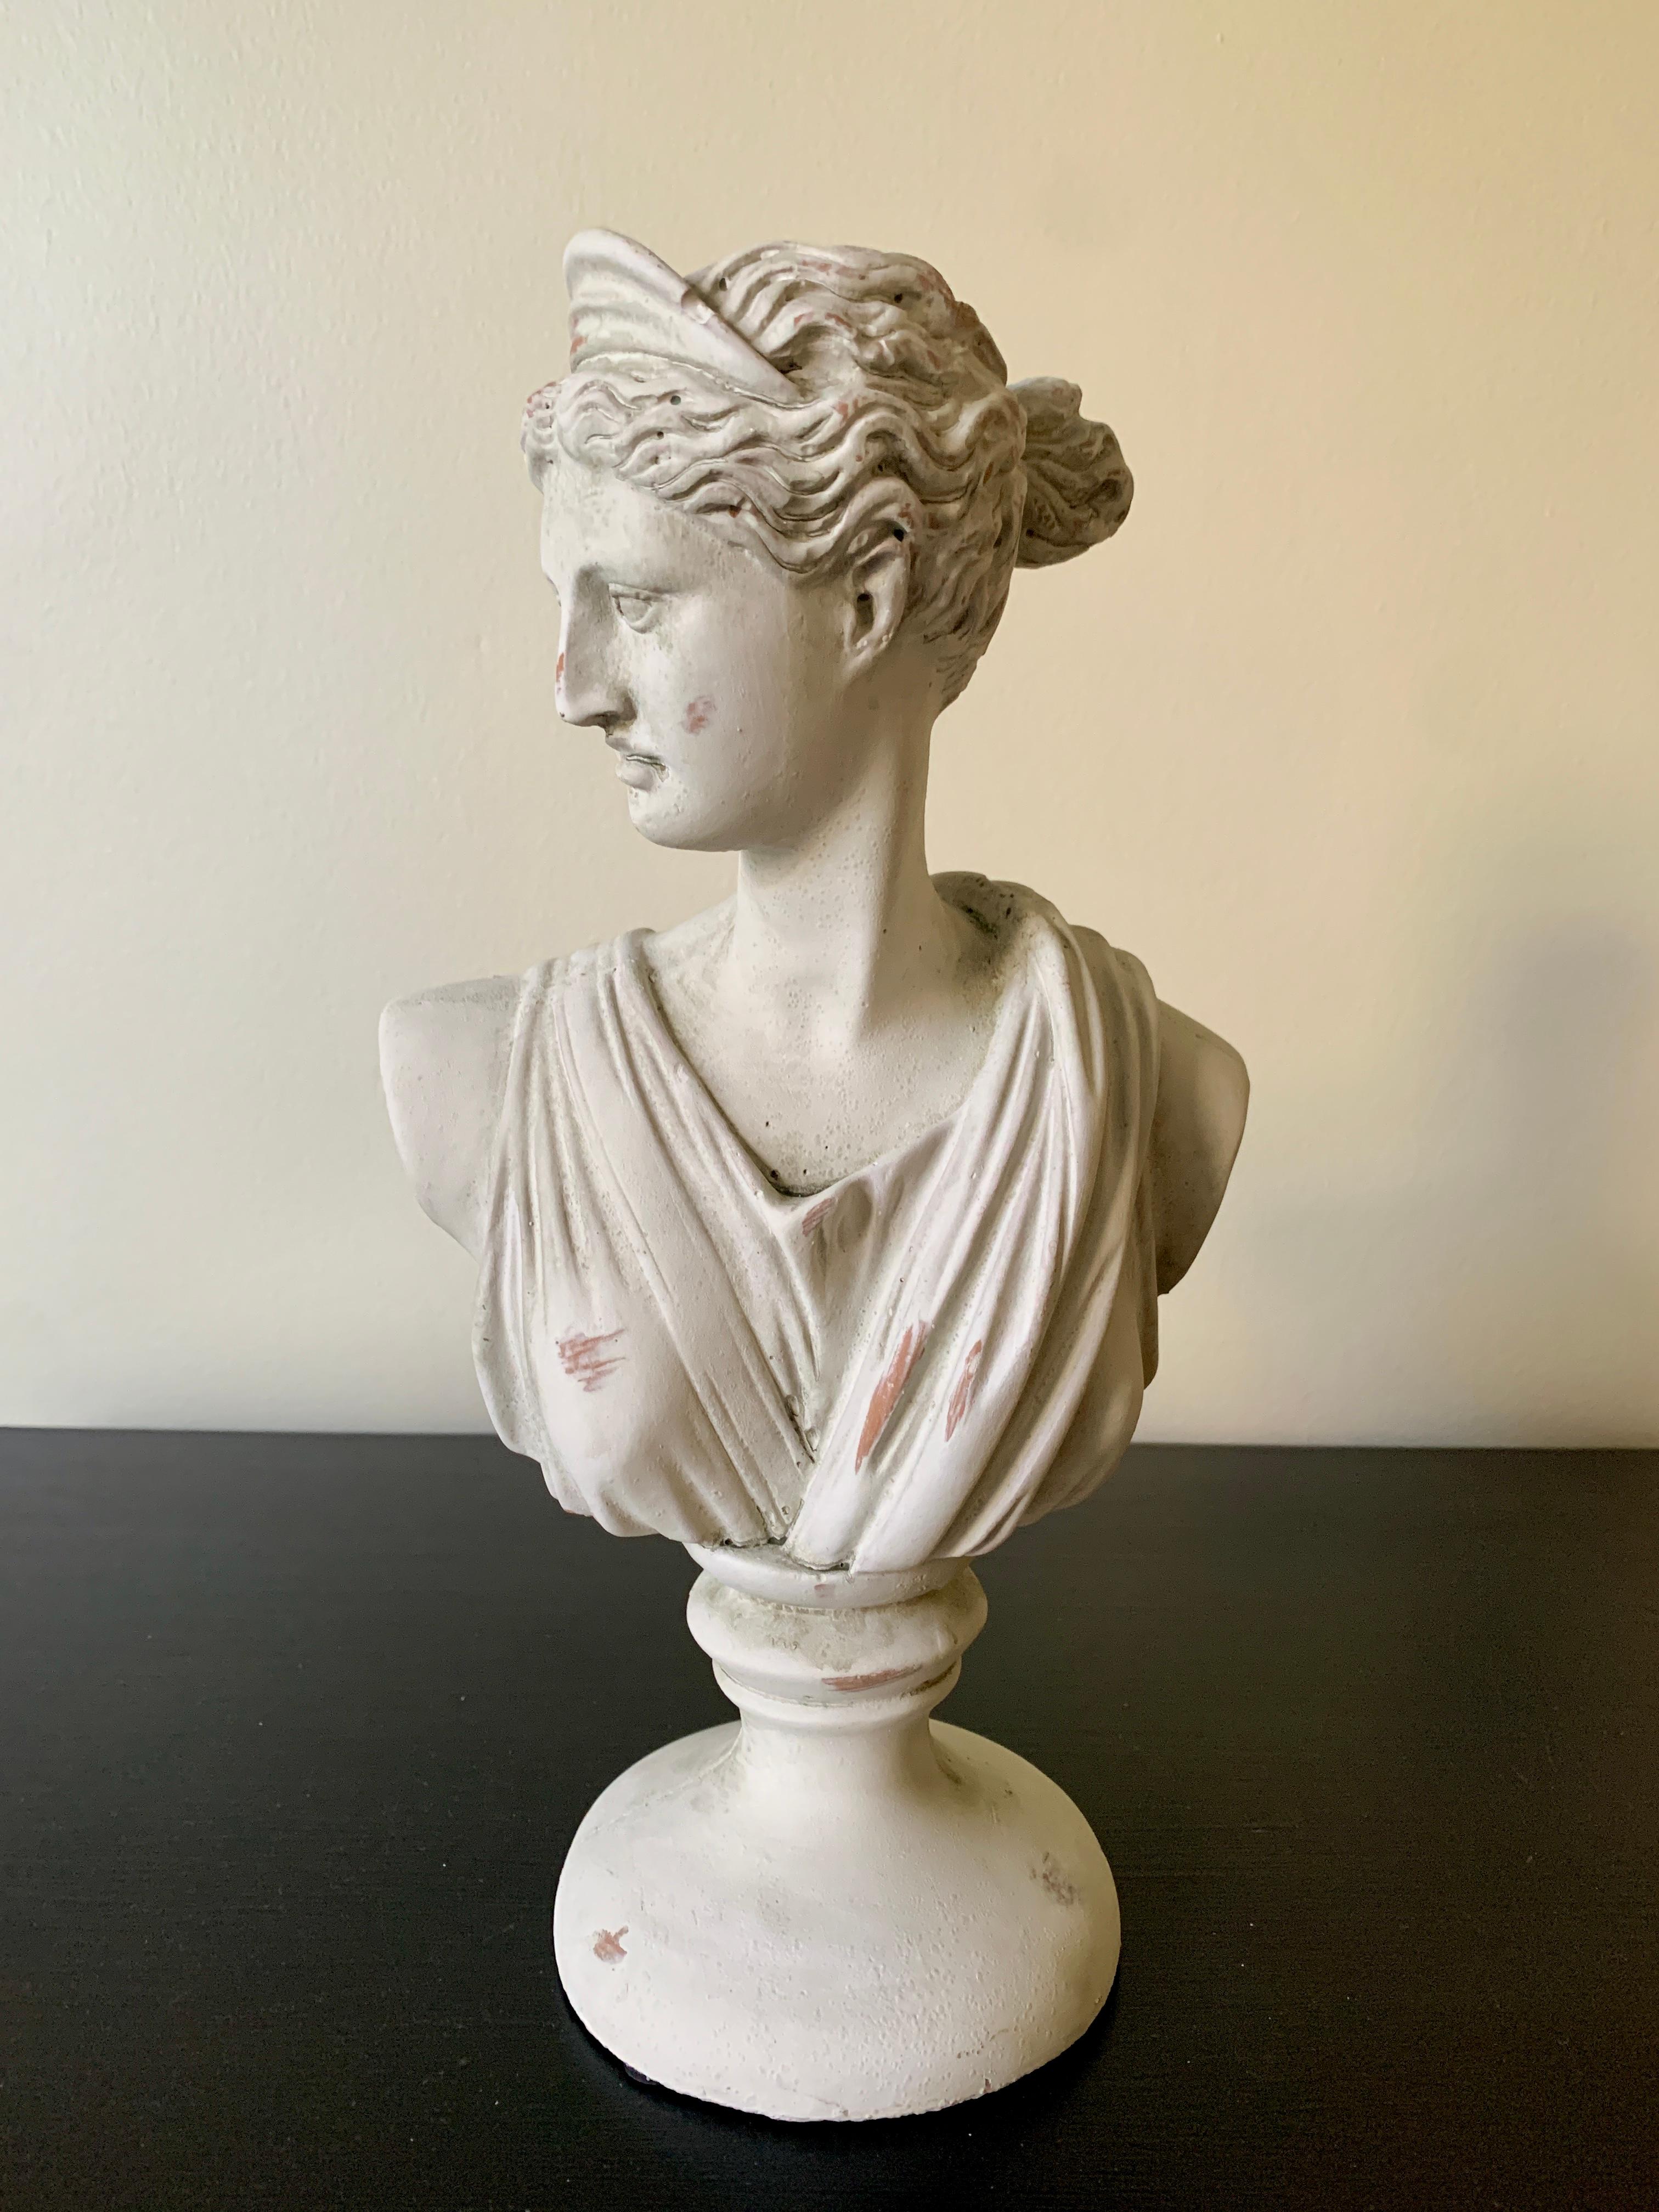 A gorgeous cast plaster Neoclassical Grand Tour style female head bust of Diana the Huntress goddess sculpture

USA, 21st Century

Measures: 8